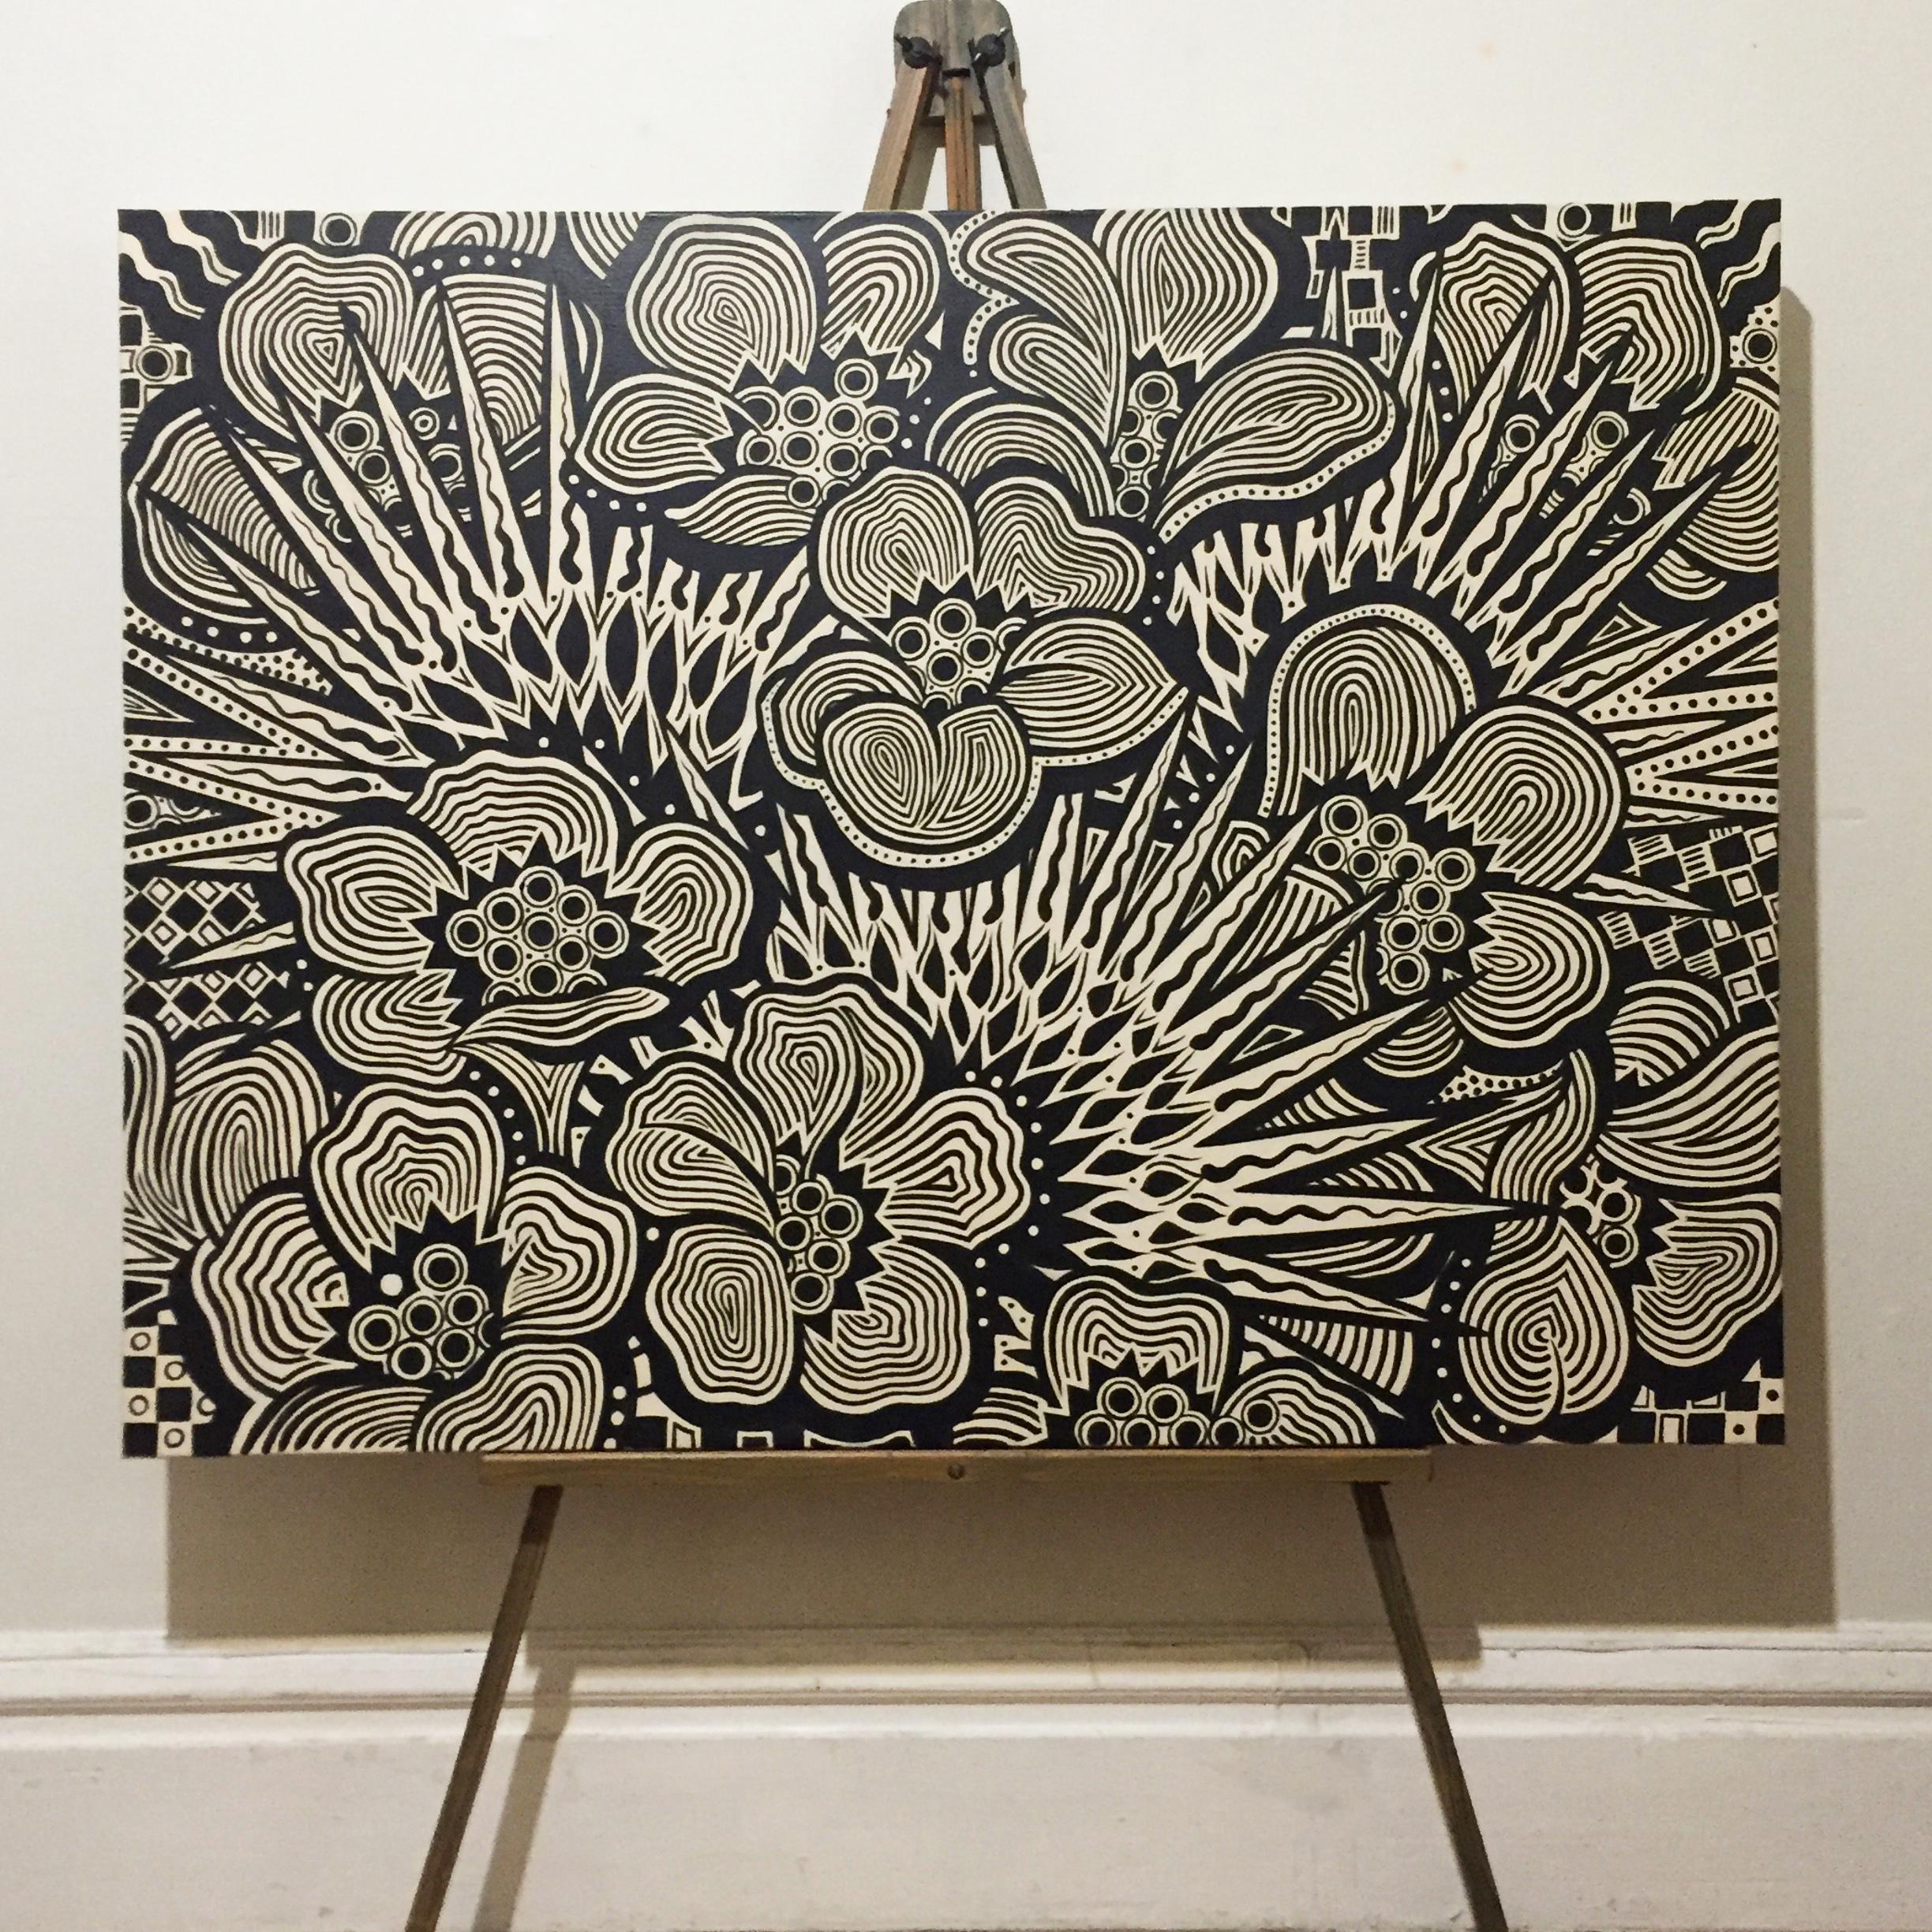 <p>Artist Comments<br />Graphic patterned floral scene in black and white. Part of a series of paintings and wood cutouts inspired by Johnny's love of pattern and the natural expression of spontaneous simplicity and flow. 